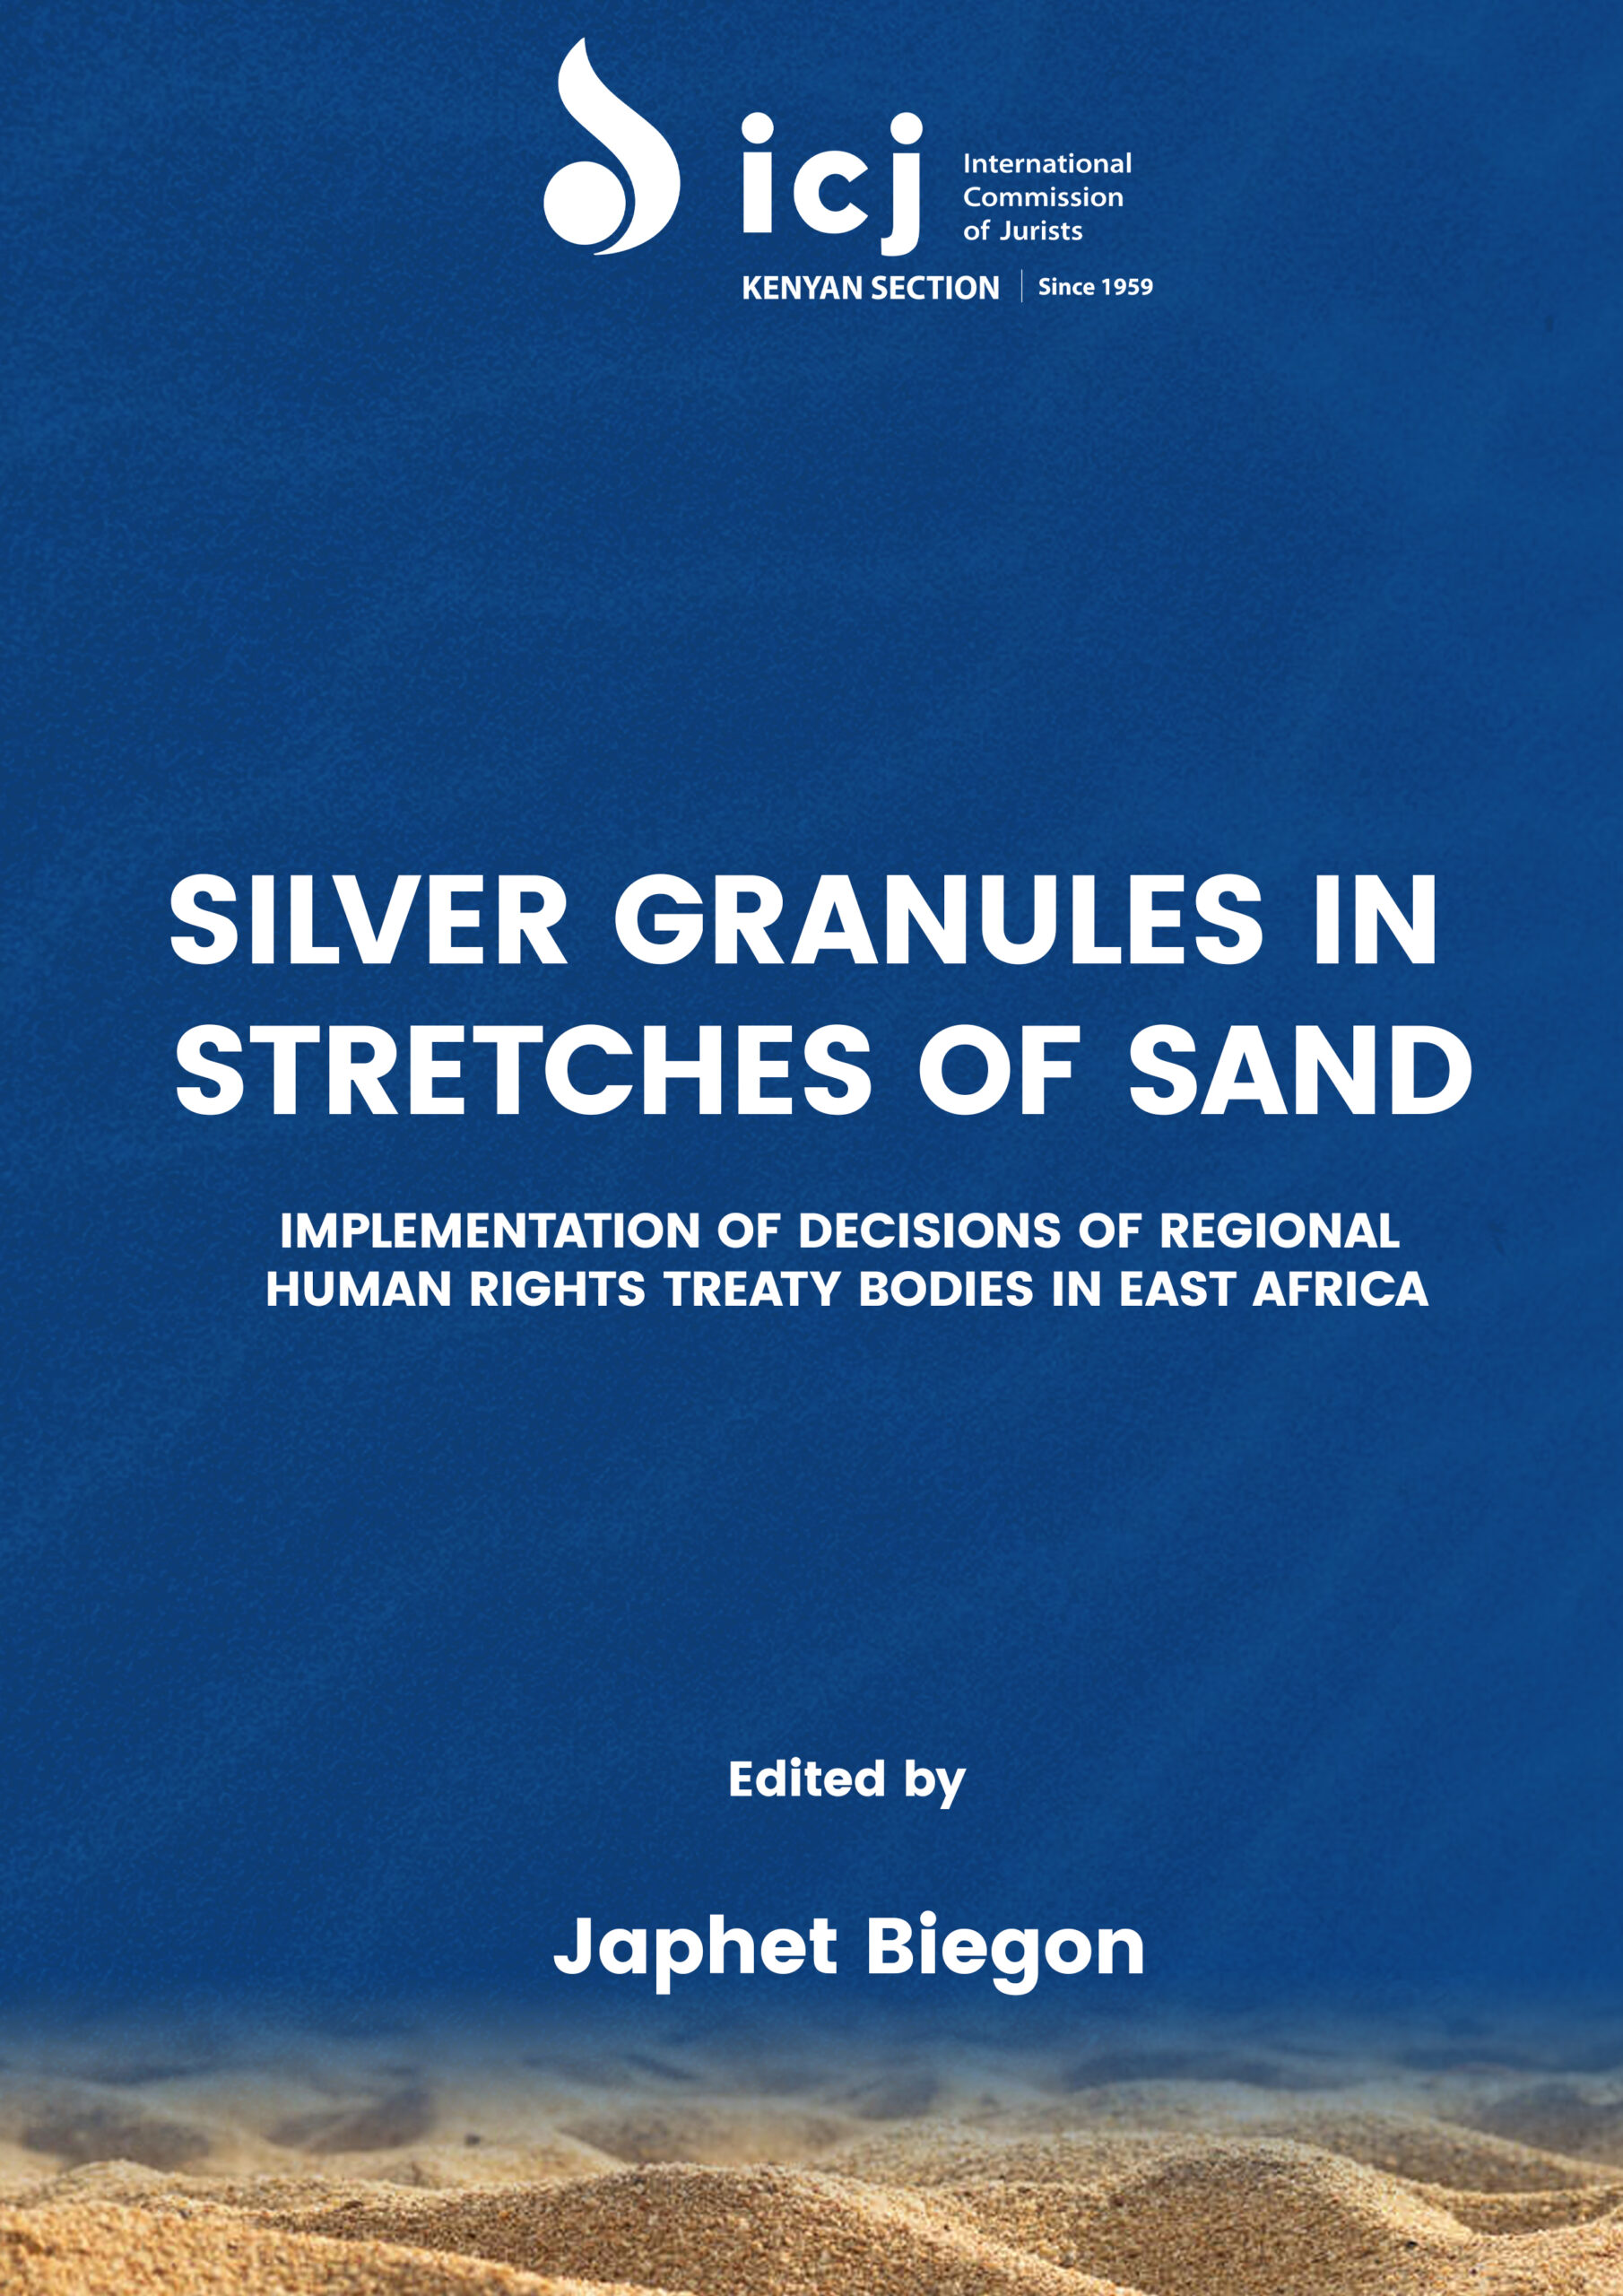 Silver Granules in Stretches of Sand: Implementation of Decisions of Regional Human Rights Treaty Bodies in East Africa